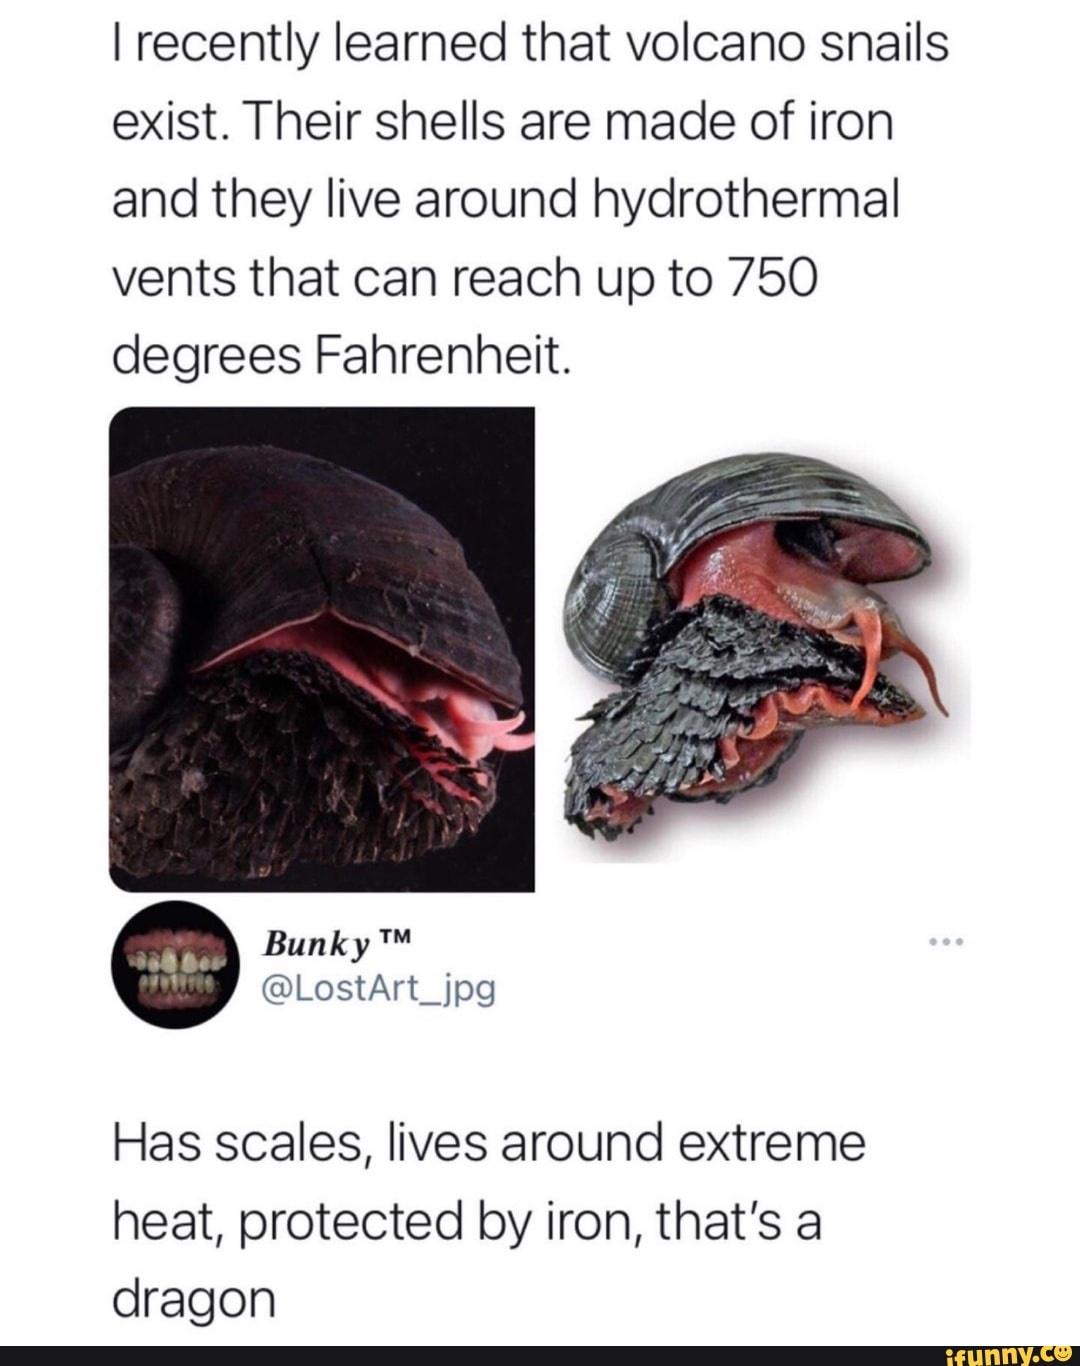 funny memes and random pics - reptile - I recently learned that volcano snails exist. Their shells are made of iron and they live around hydrothermal vents that can reach up to 750 degrees Fahrenheit. Tm Bunky Has scales, lives around extreme heat, protec